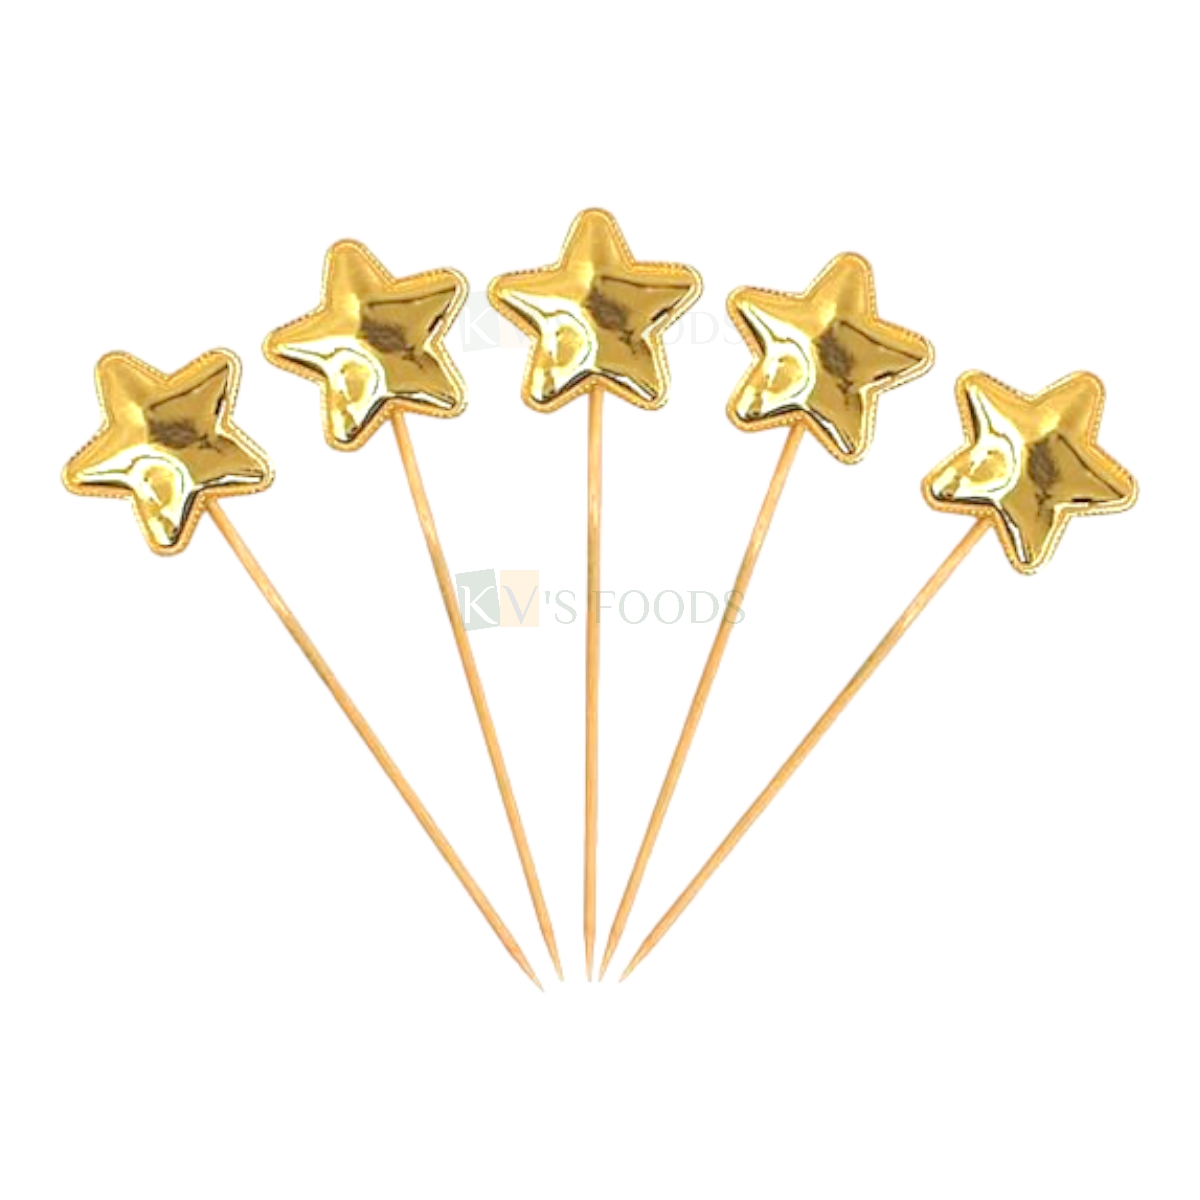 10 PCS Shiny Golden Colour Star Shape Spongy Toothpick Cake Topper Cupcake Leather Toppers Wedding New Years Cakes Decorations Happy Birthday Theme Fruit Pick Foam Bamboo Toothpick DIY Cake Decoration